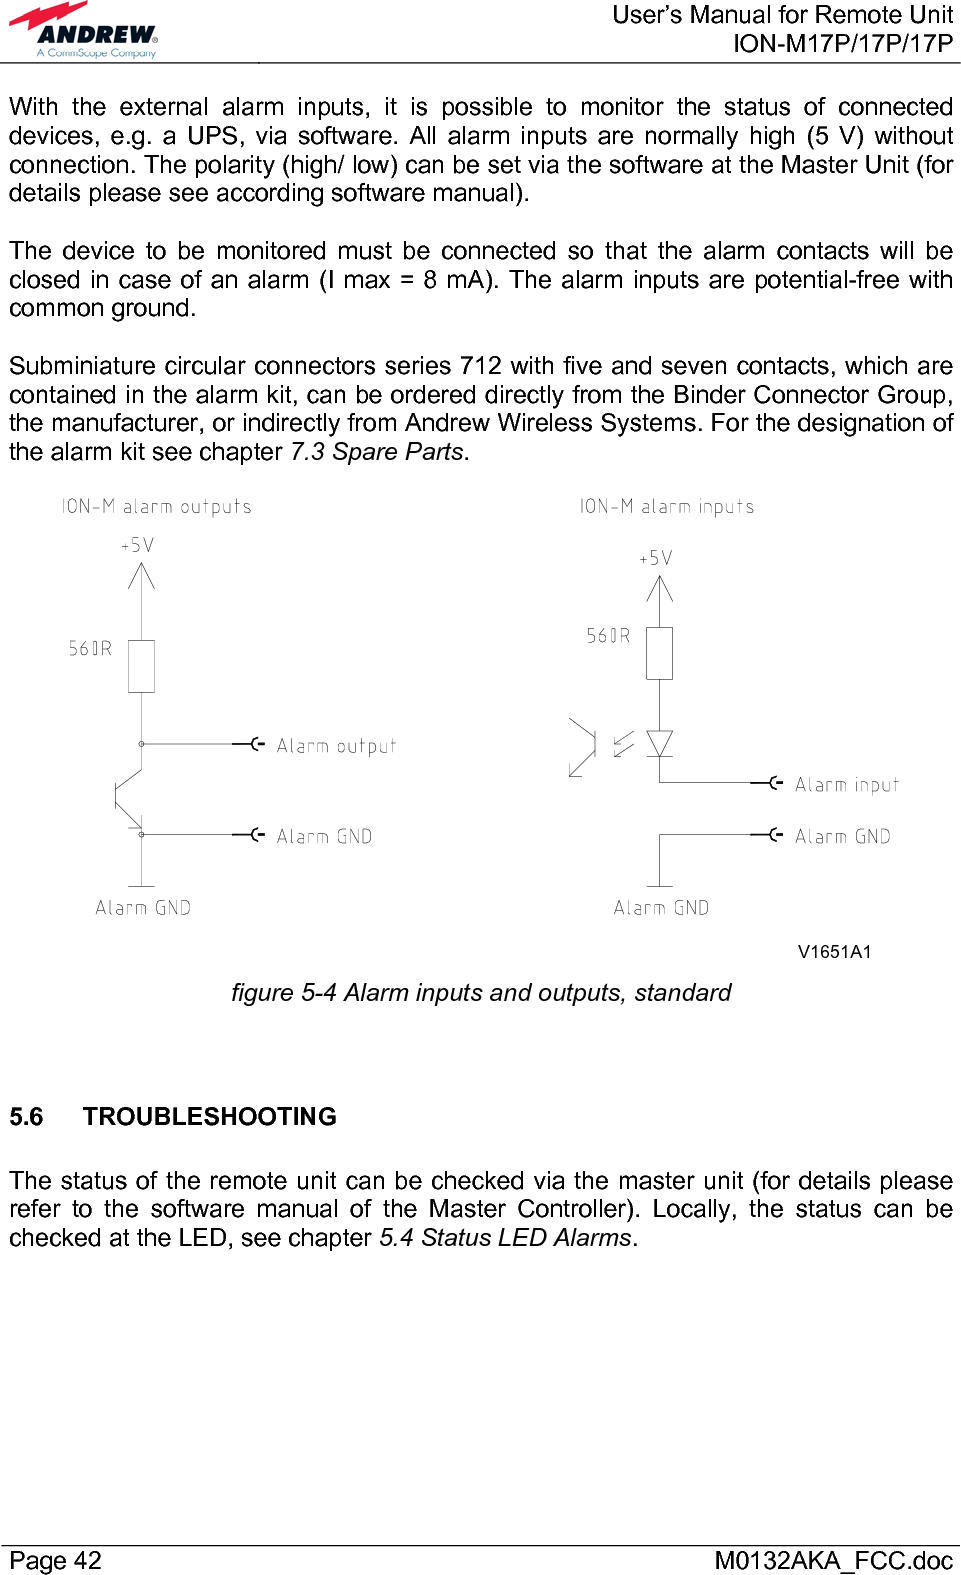  User’s Manual for Remote UnitION-M17P/17P/17P Page 42      M0132AKA_FCC.doc With the external alarm inputs, it is possible to monitor the status of connected devices, e.g. a UPS, via software. All alarm inputs are normally high (5 V) without connection. The polarity (high/ low) can be set via the software at the Master Unit (for details please see according software manual).  The device to be monitored must be connected so that the alarm contacts will be closed in case of an alarm (I max = 8 mA). The alarm inputs are potential-free with common ground.  Subminiature circular connectors series 712 with five and seven contacts, which are contained in the alarm kit, can be ordered directly from the Binder Connector Group, the manufacturer, or indirectly from Andrew Wireless Systems. For the designation of the alarm kit see chapter 7.3 Spare Parts.  V1651A1  figure 5-4 Alarm inputs and outputs, standard   5.6 TROUBLESHOOTING  The status of the remote unit can be checked via the master unit (for details please refer to the software manual of the Master Controller). Locally, the status can be checked at the LED, see chapter 5.4 Status LED Alarms.   